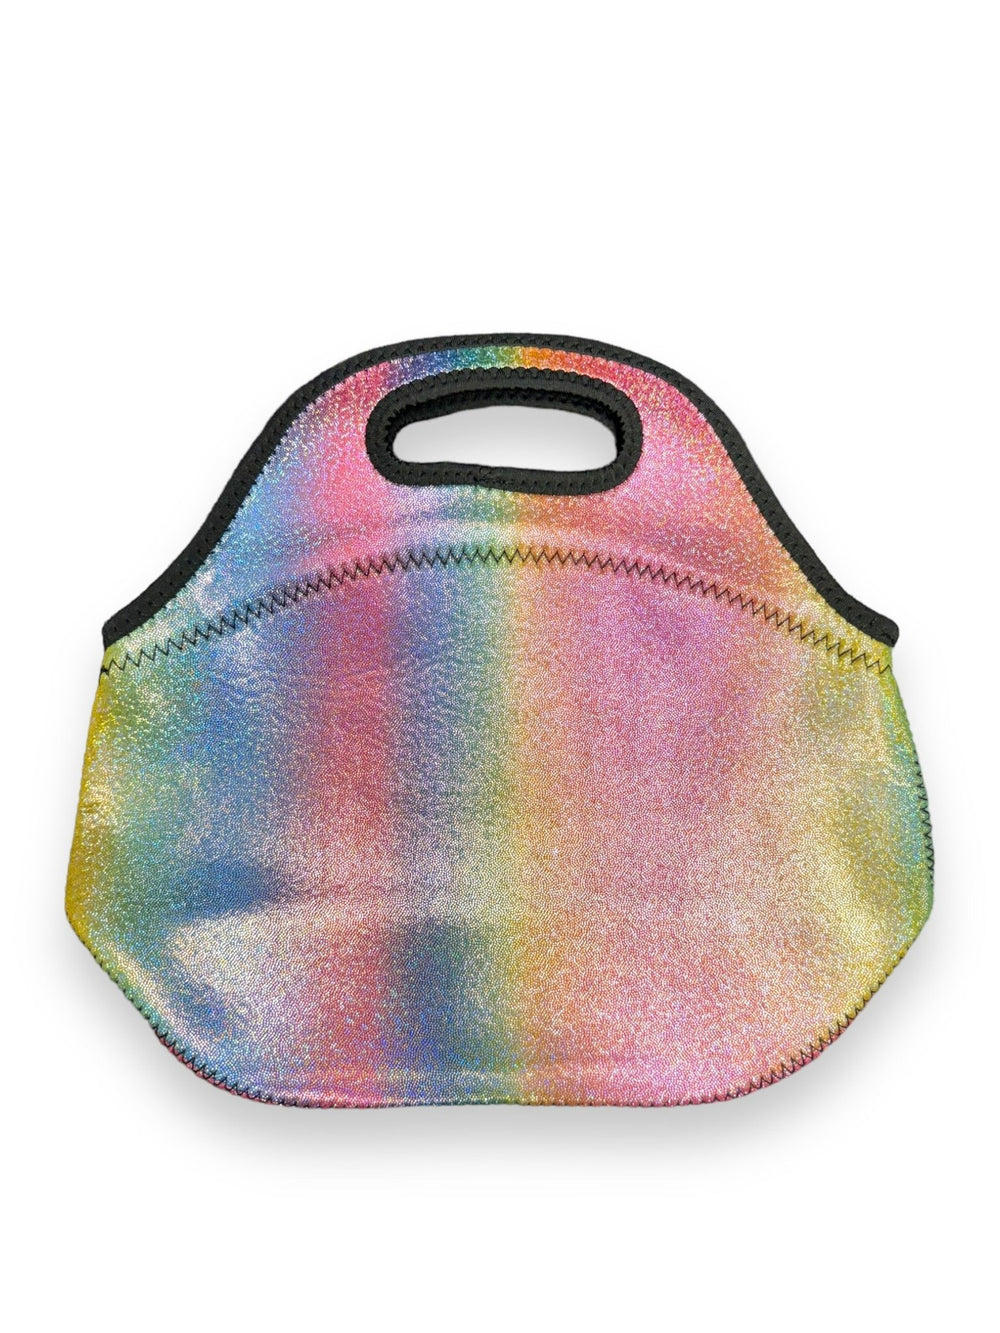 Iridescent Rainbow Lunch Bag Tote - Drink Handlers